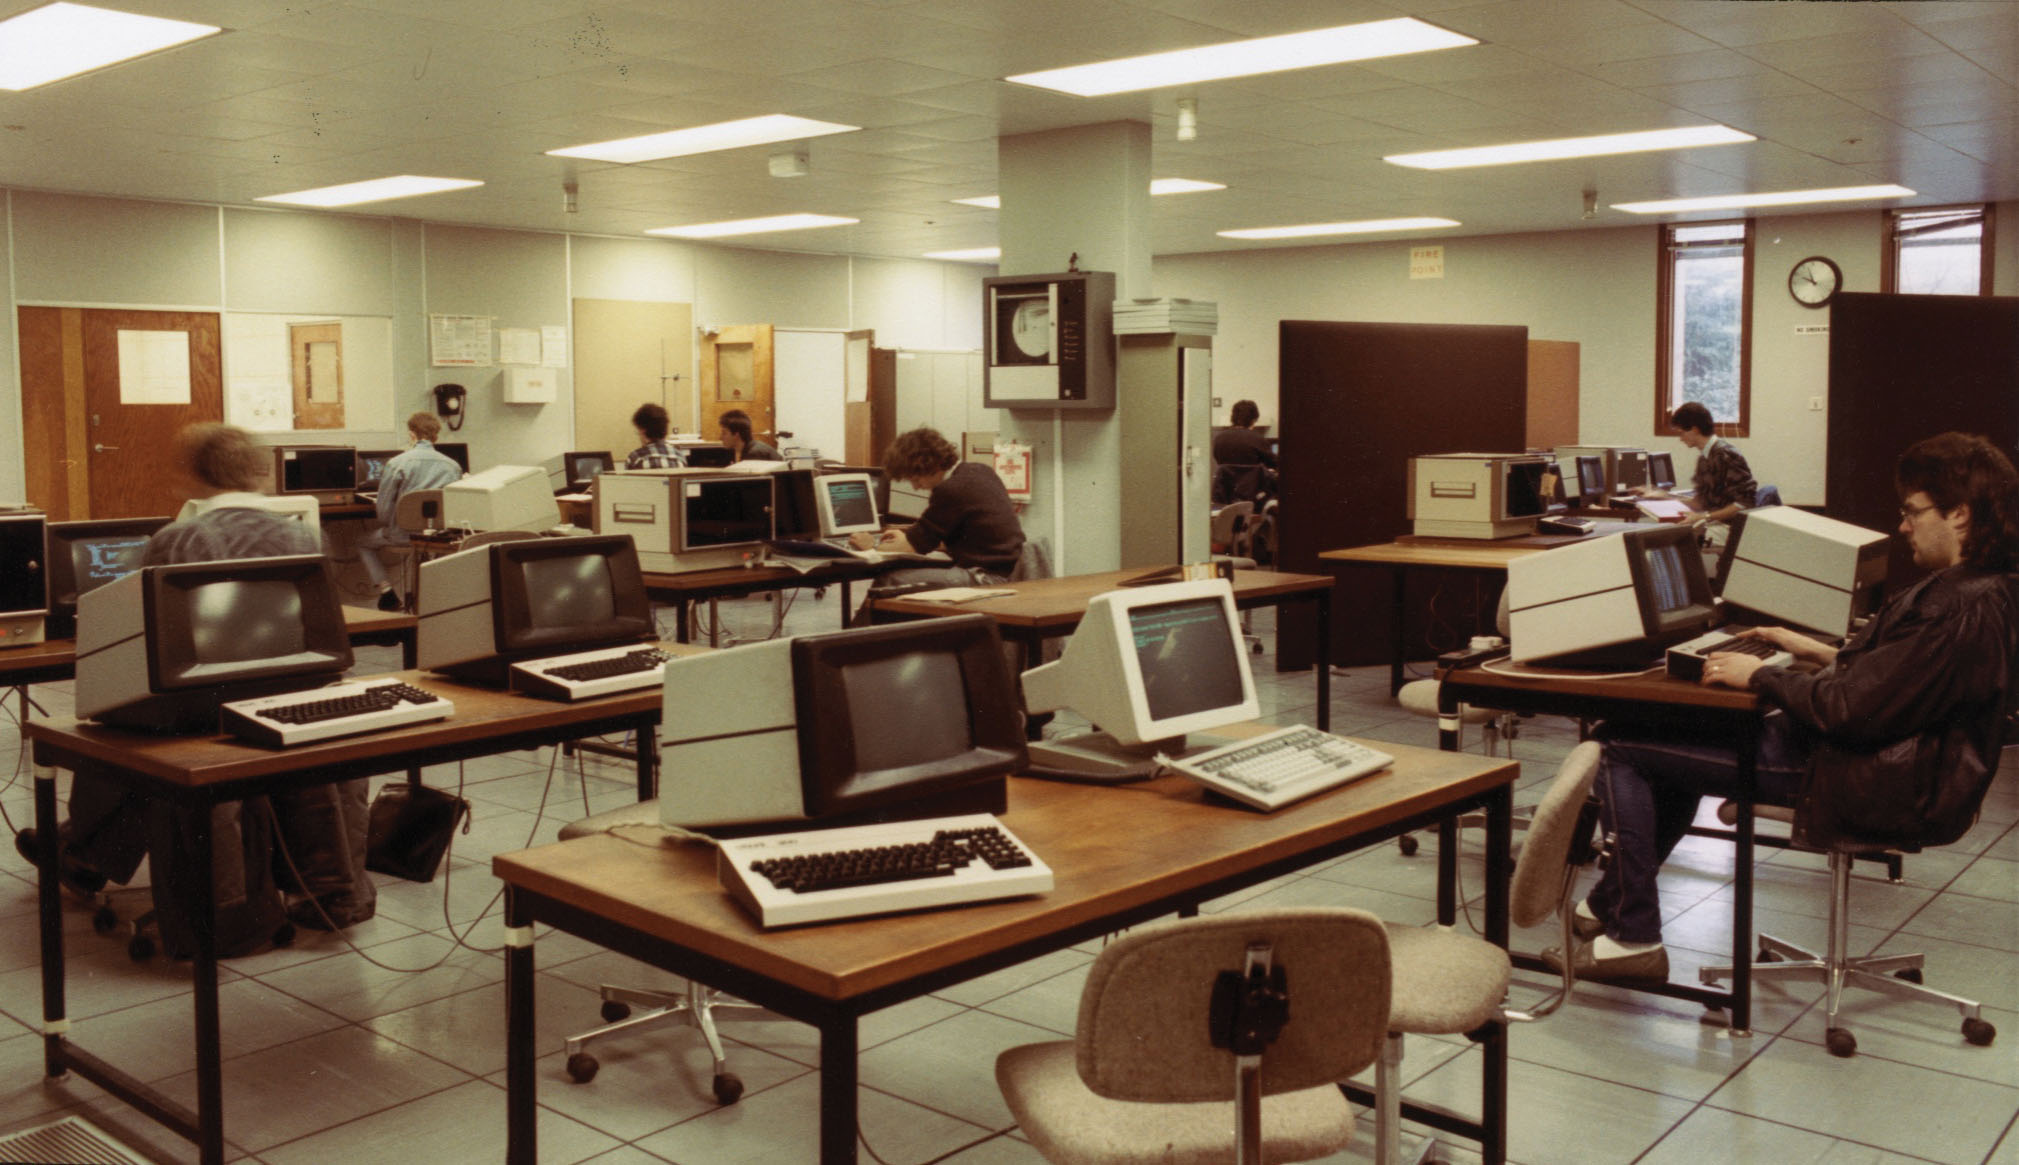 Office full of computers and workers from 1970s or 1980s.